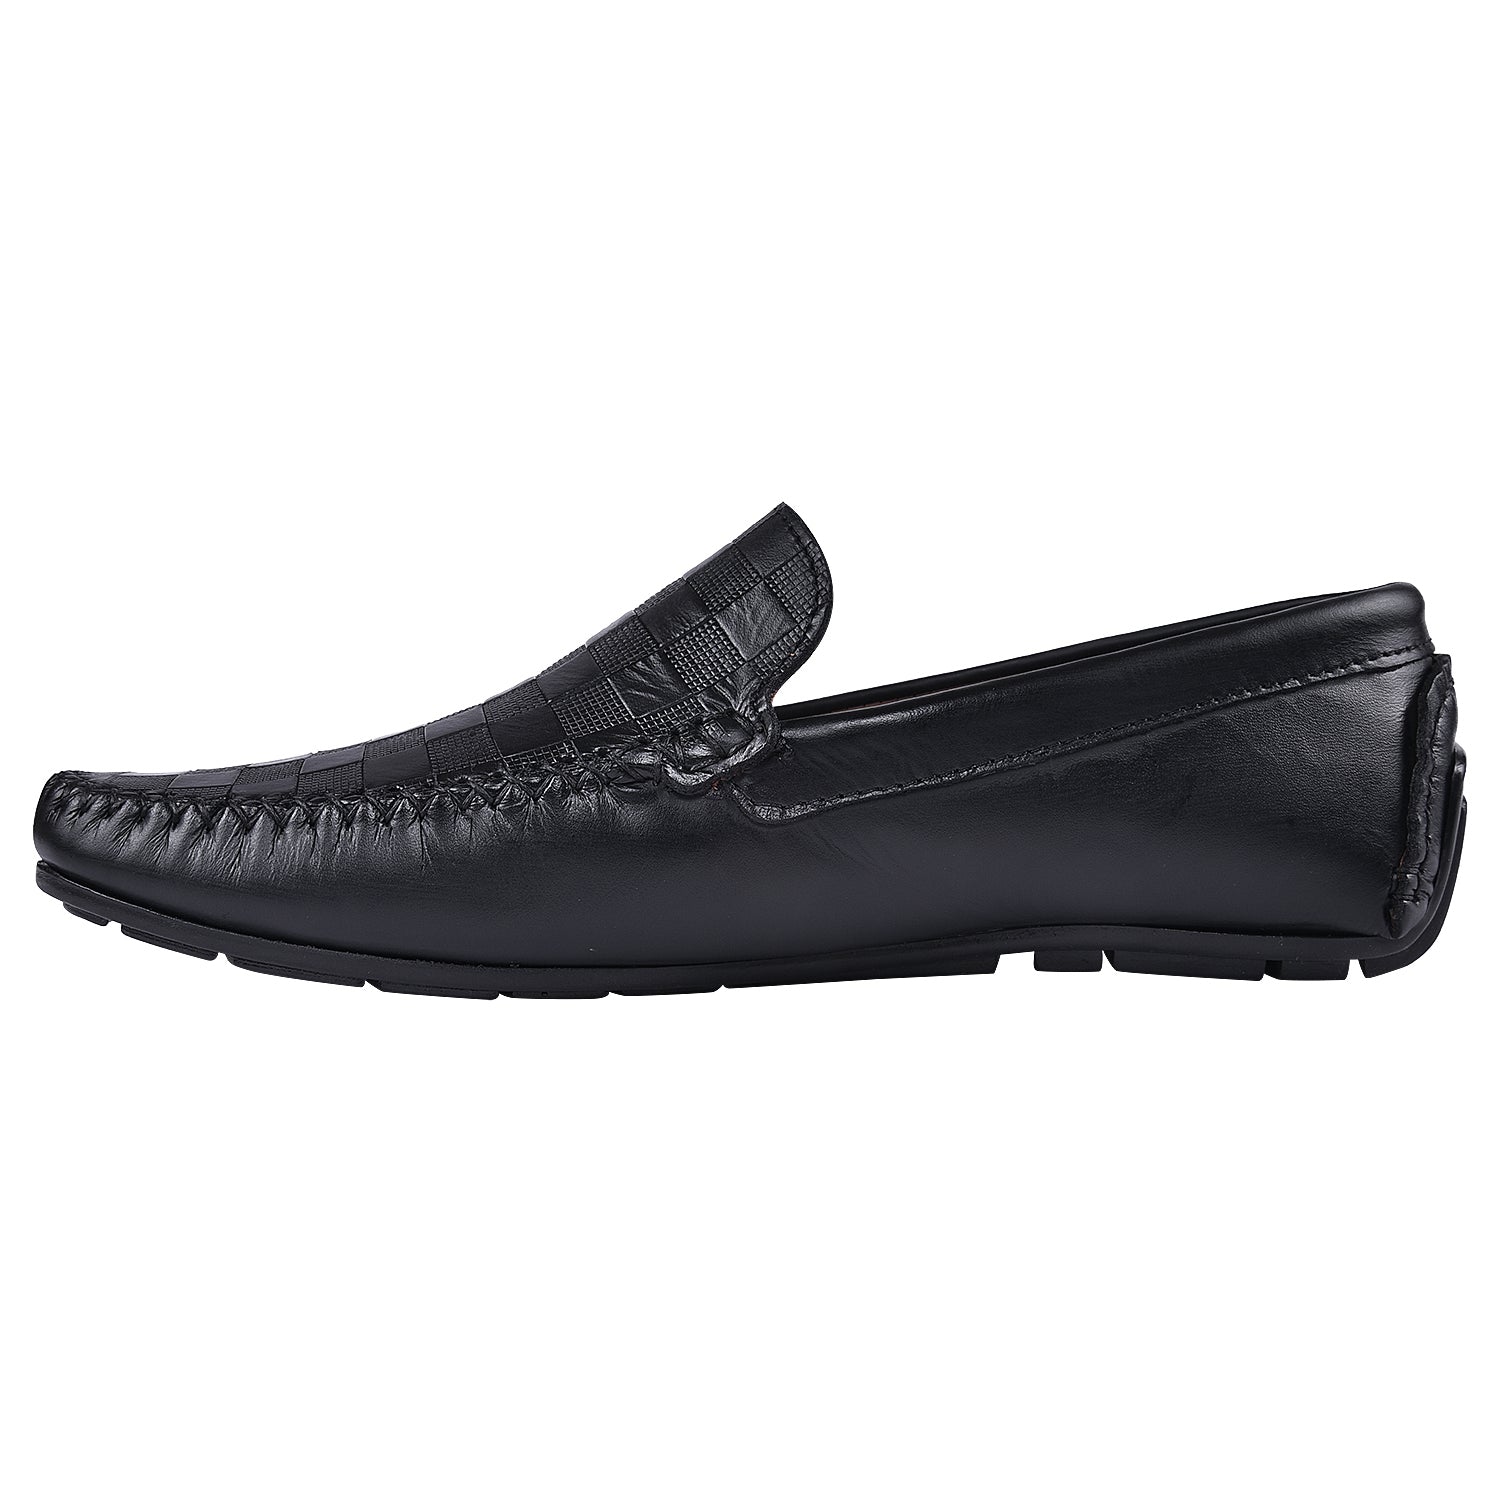 Men's Loafer checks Leather Shoes